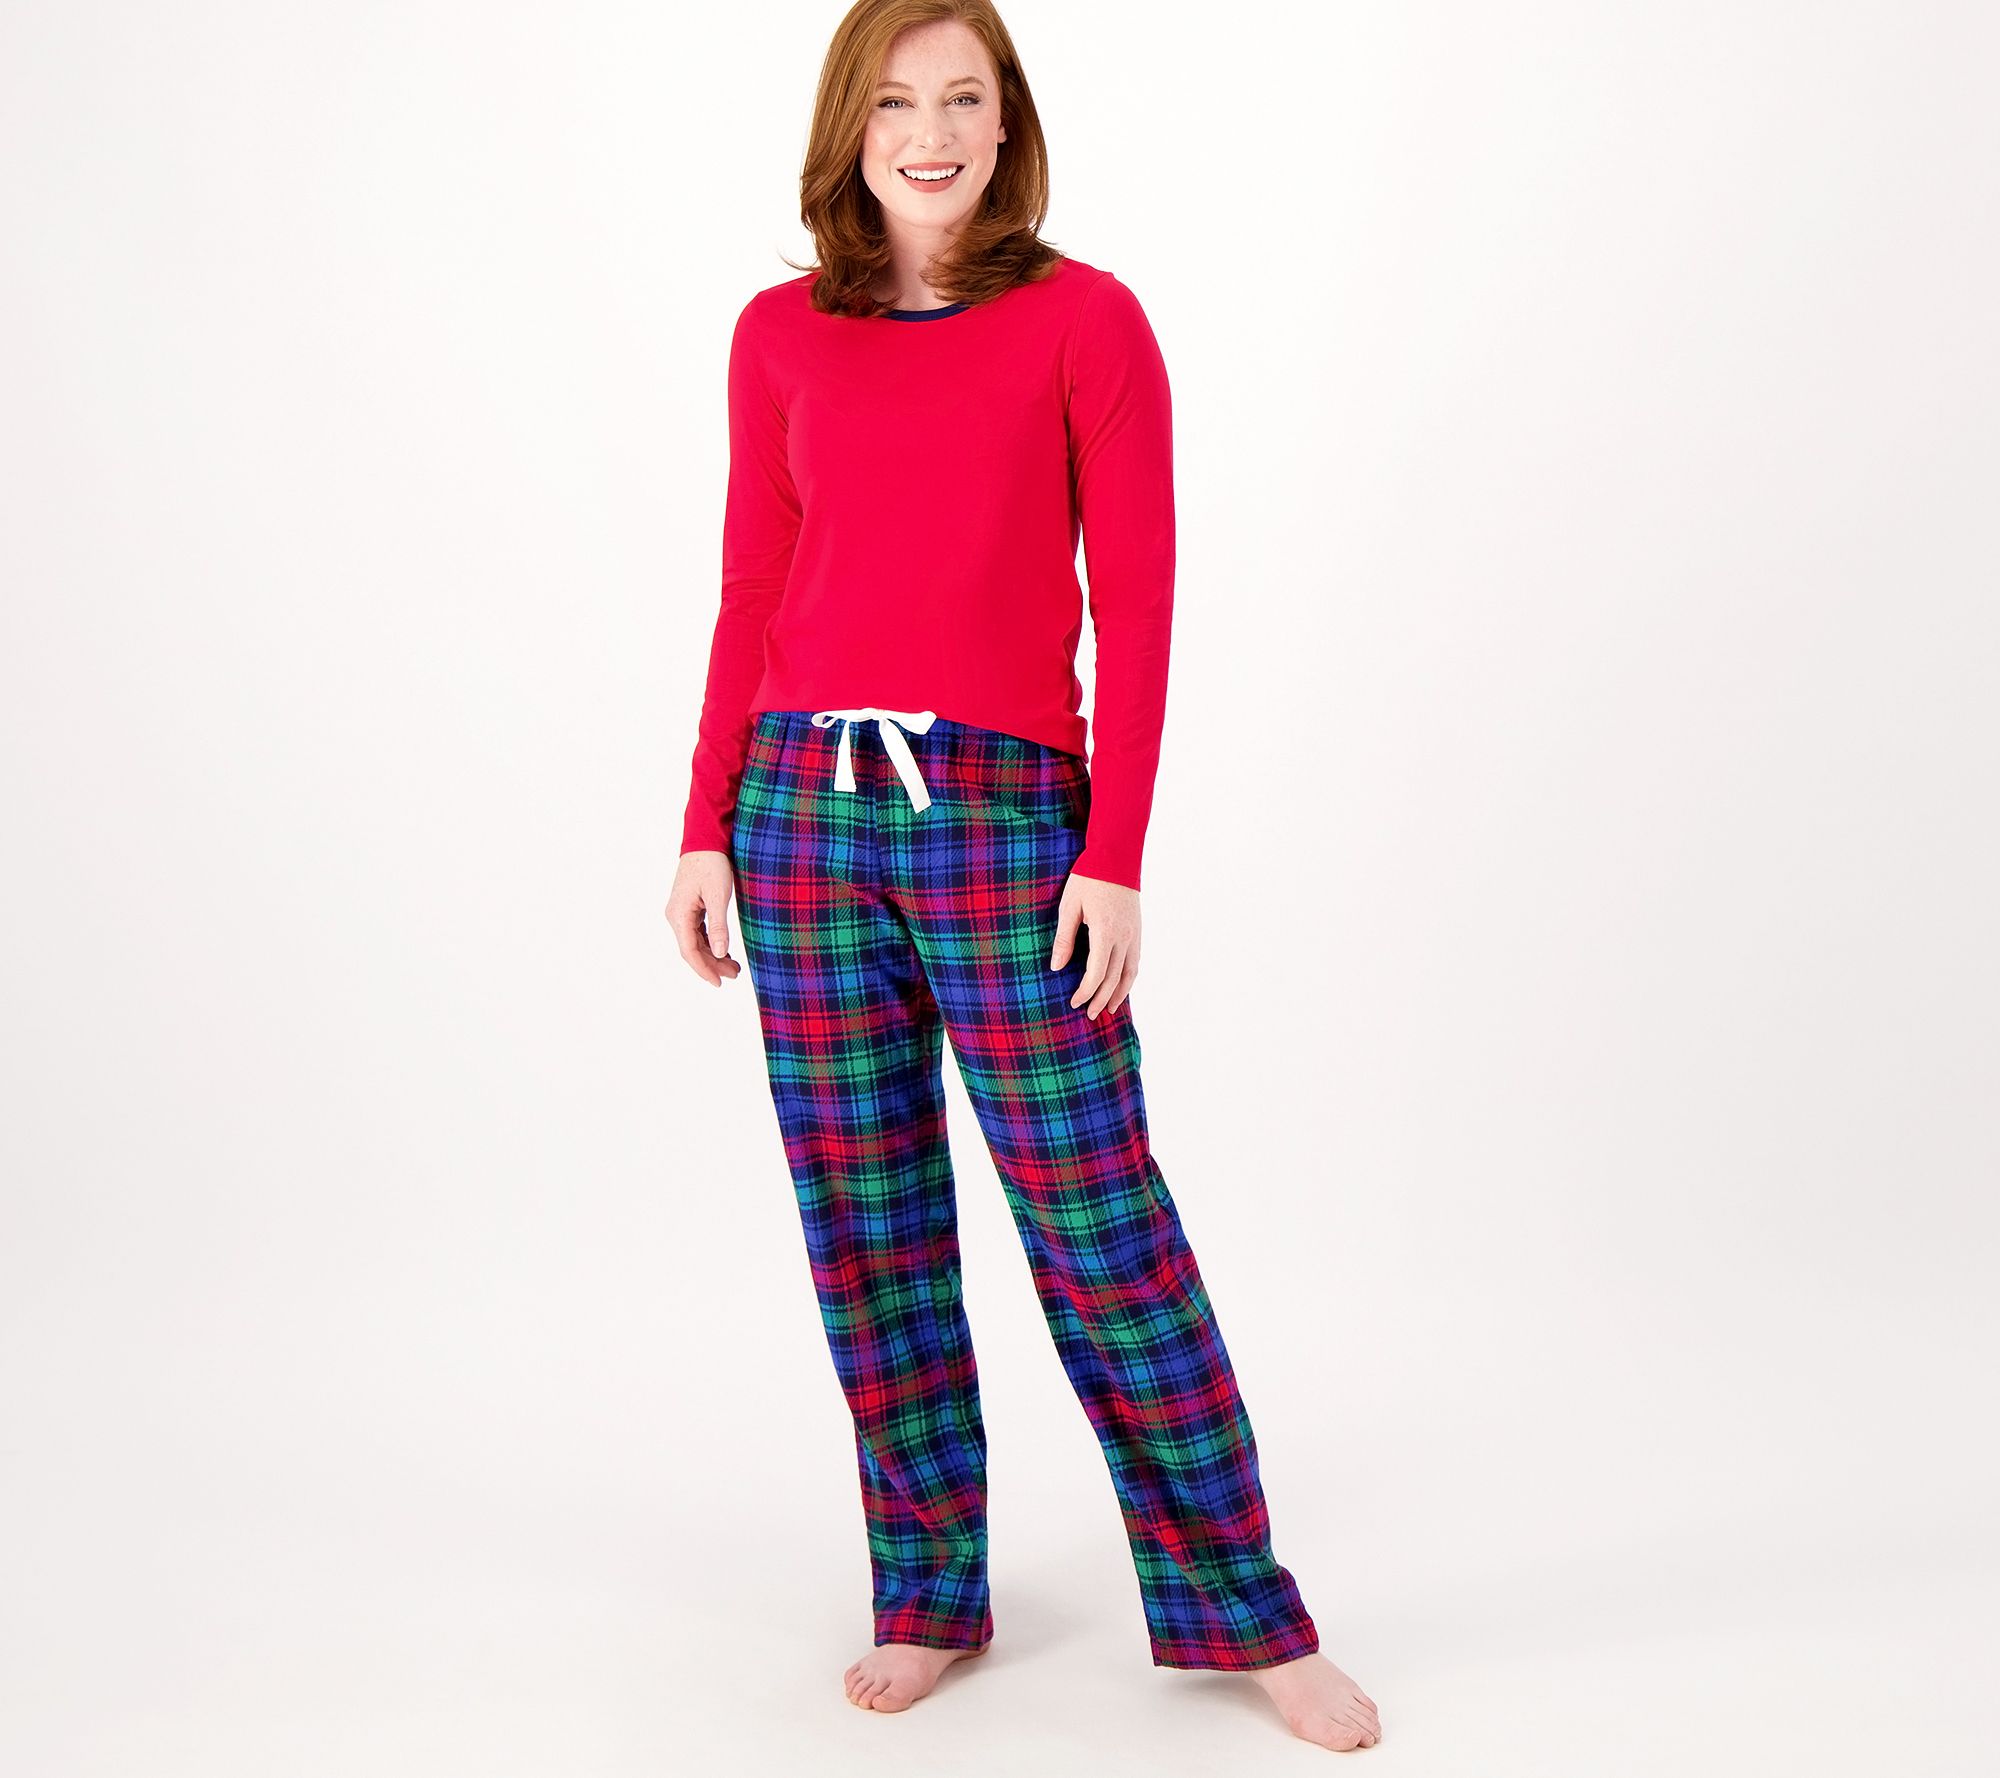 NFL Women's Short Sleeve Tee and Flannel Pajama Set 